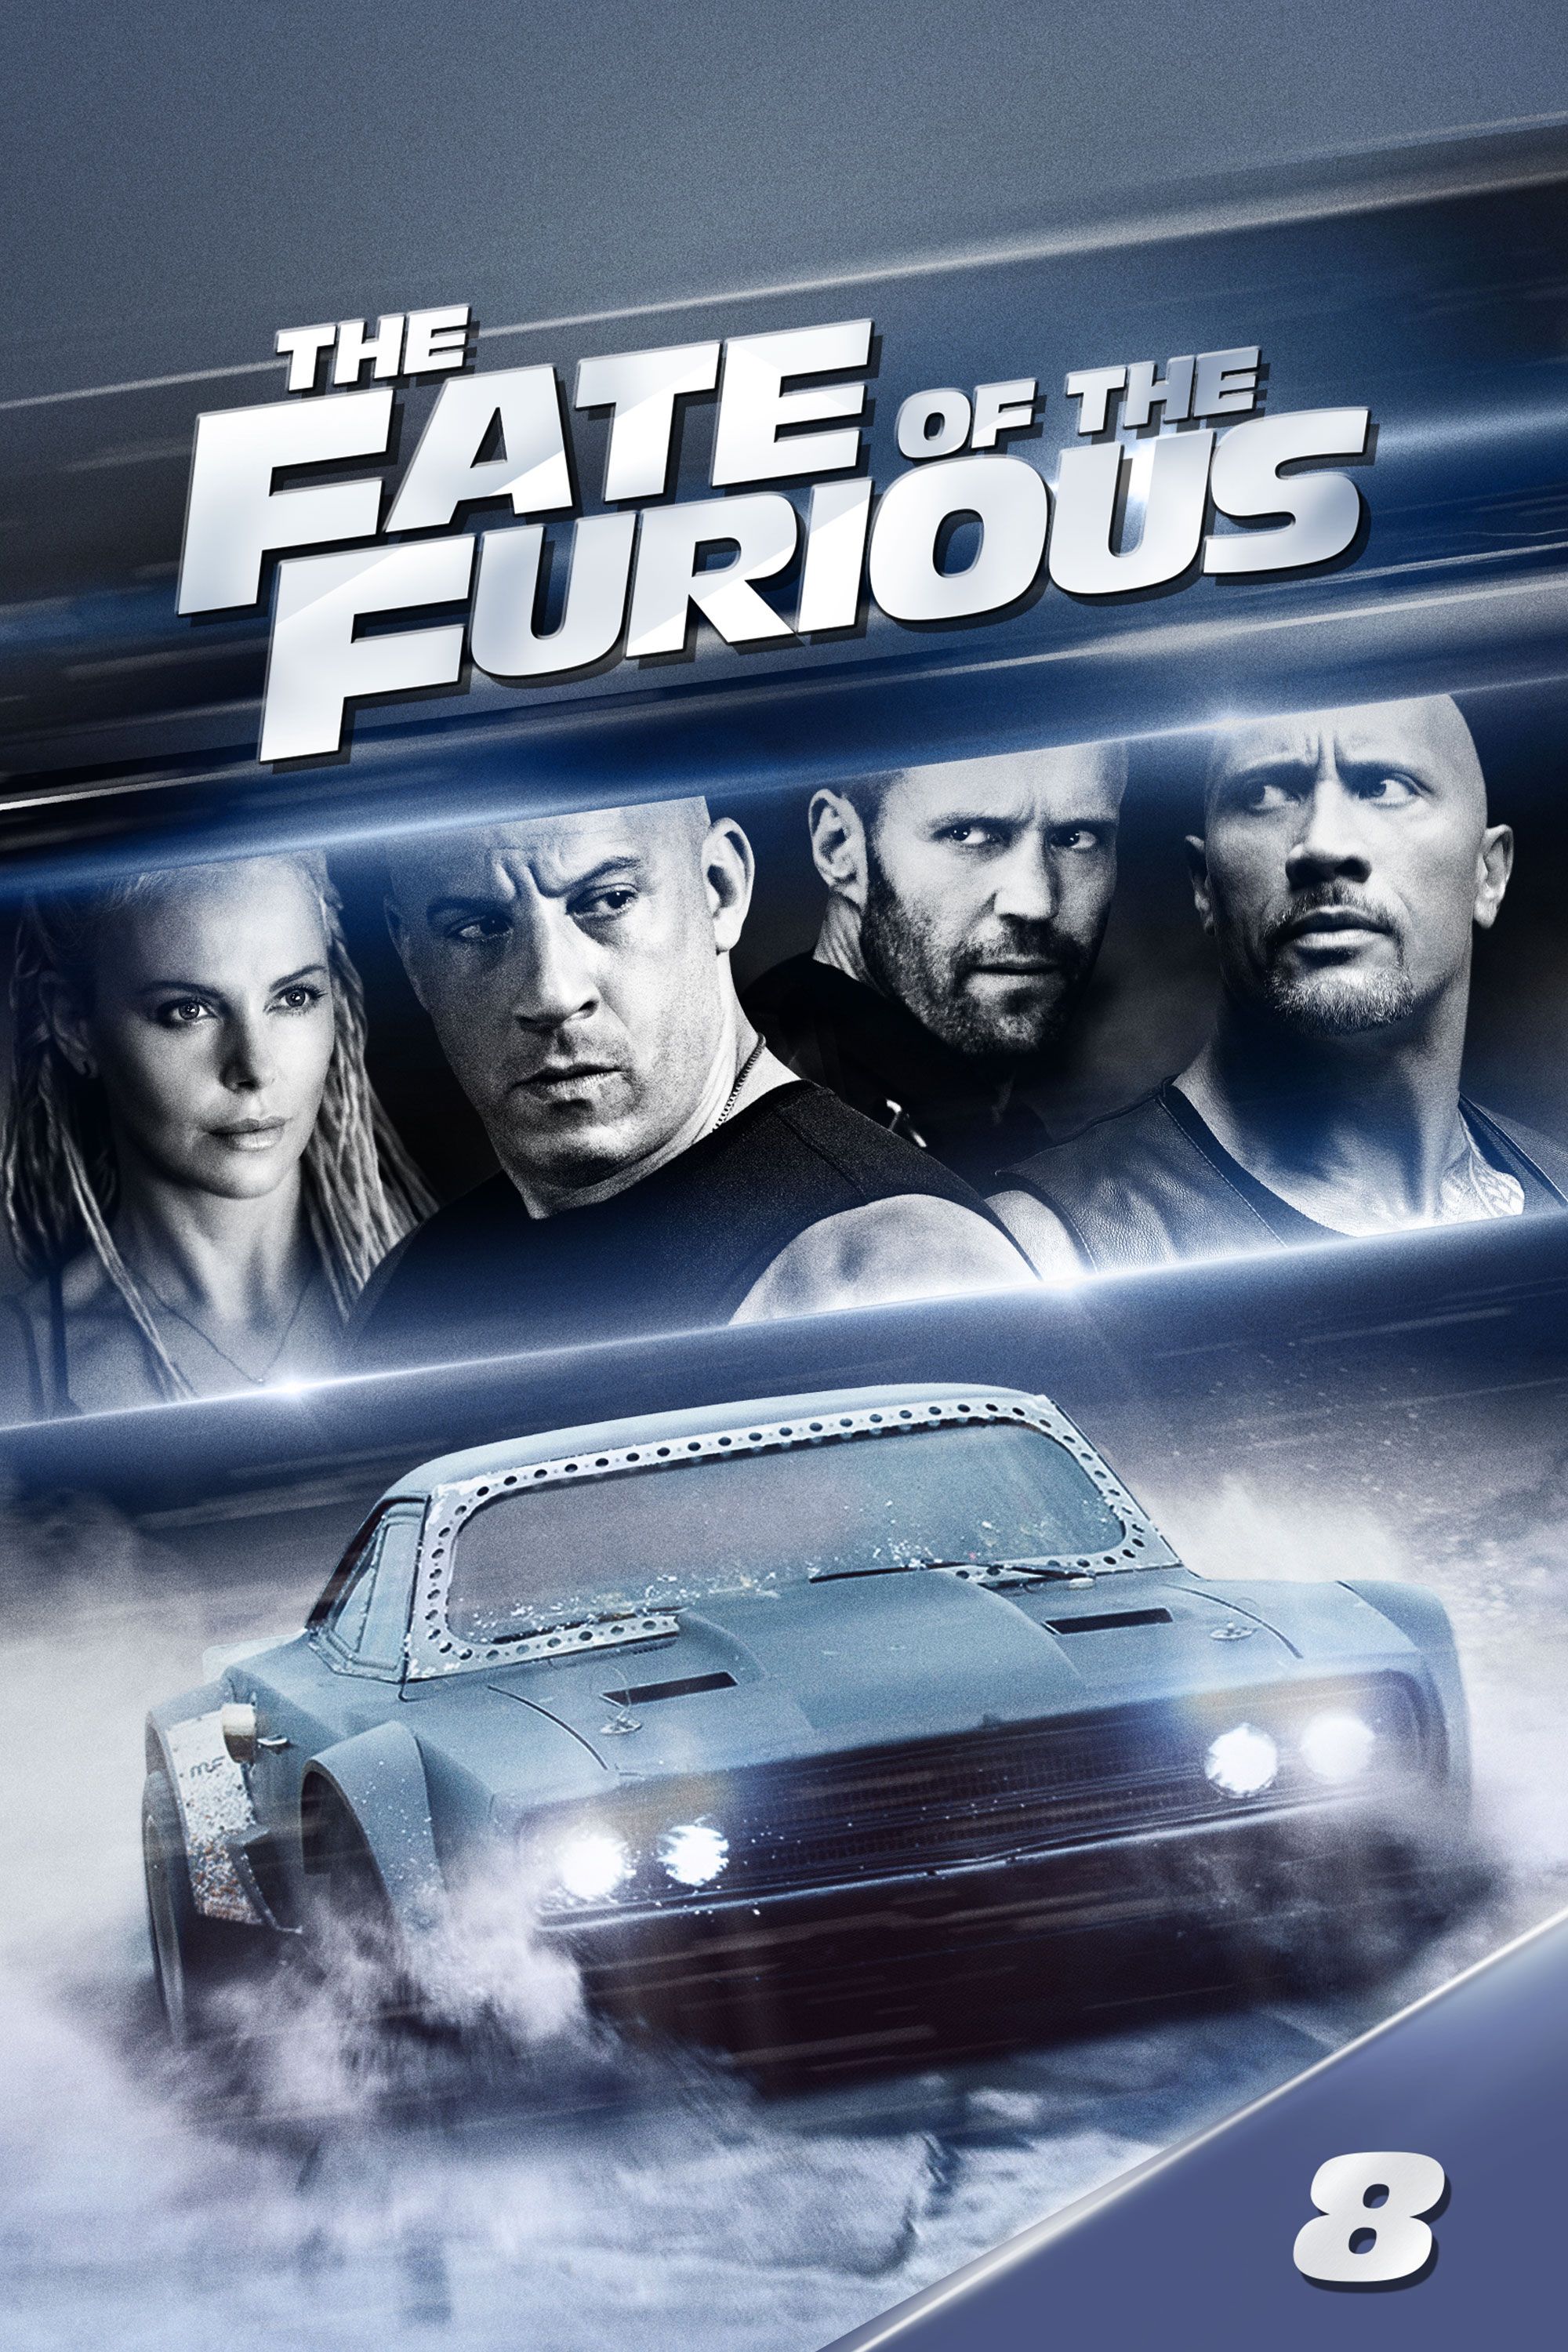 2. "Experience the High-Octane Excitement: Fast and Furious 8 Hindi HD 1080p Download"